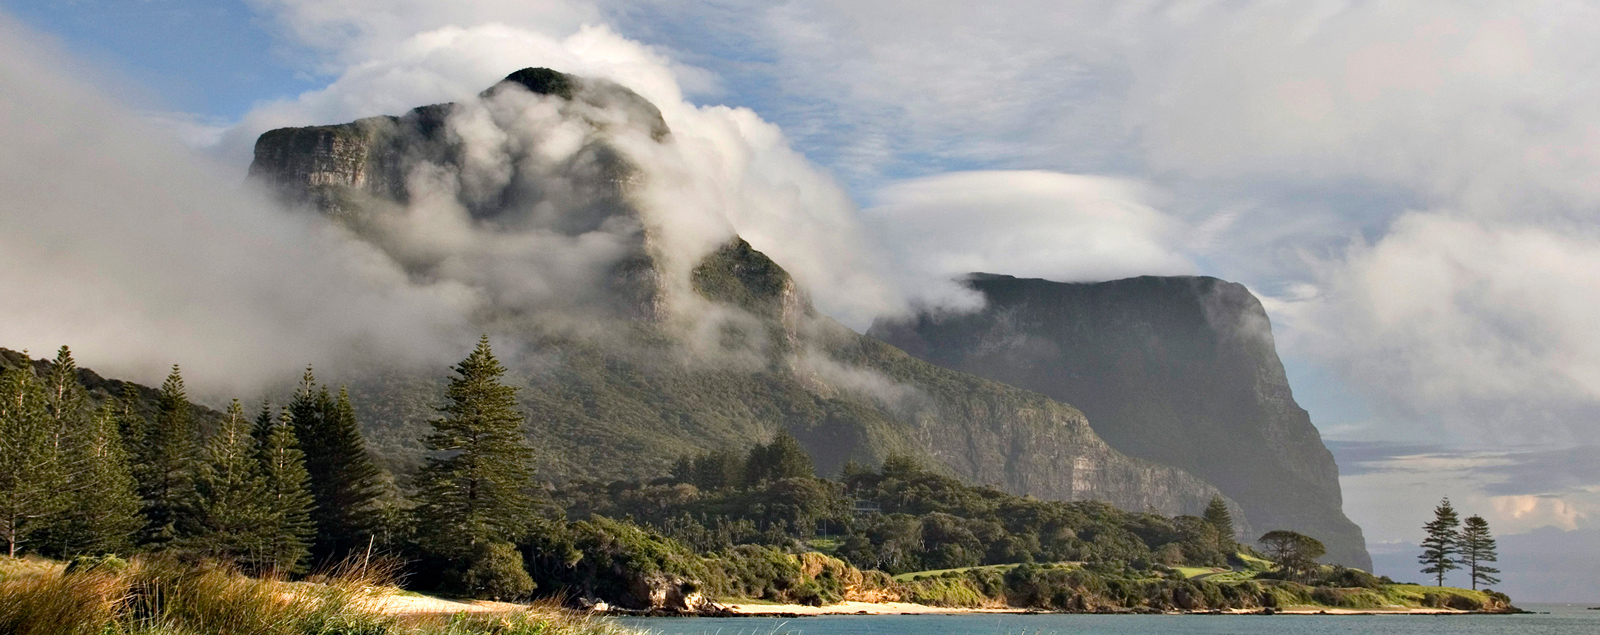 Check out Lord Howe’s Seven Peaks Walk